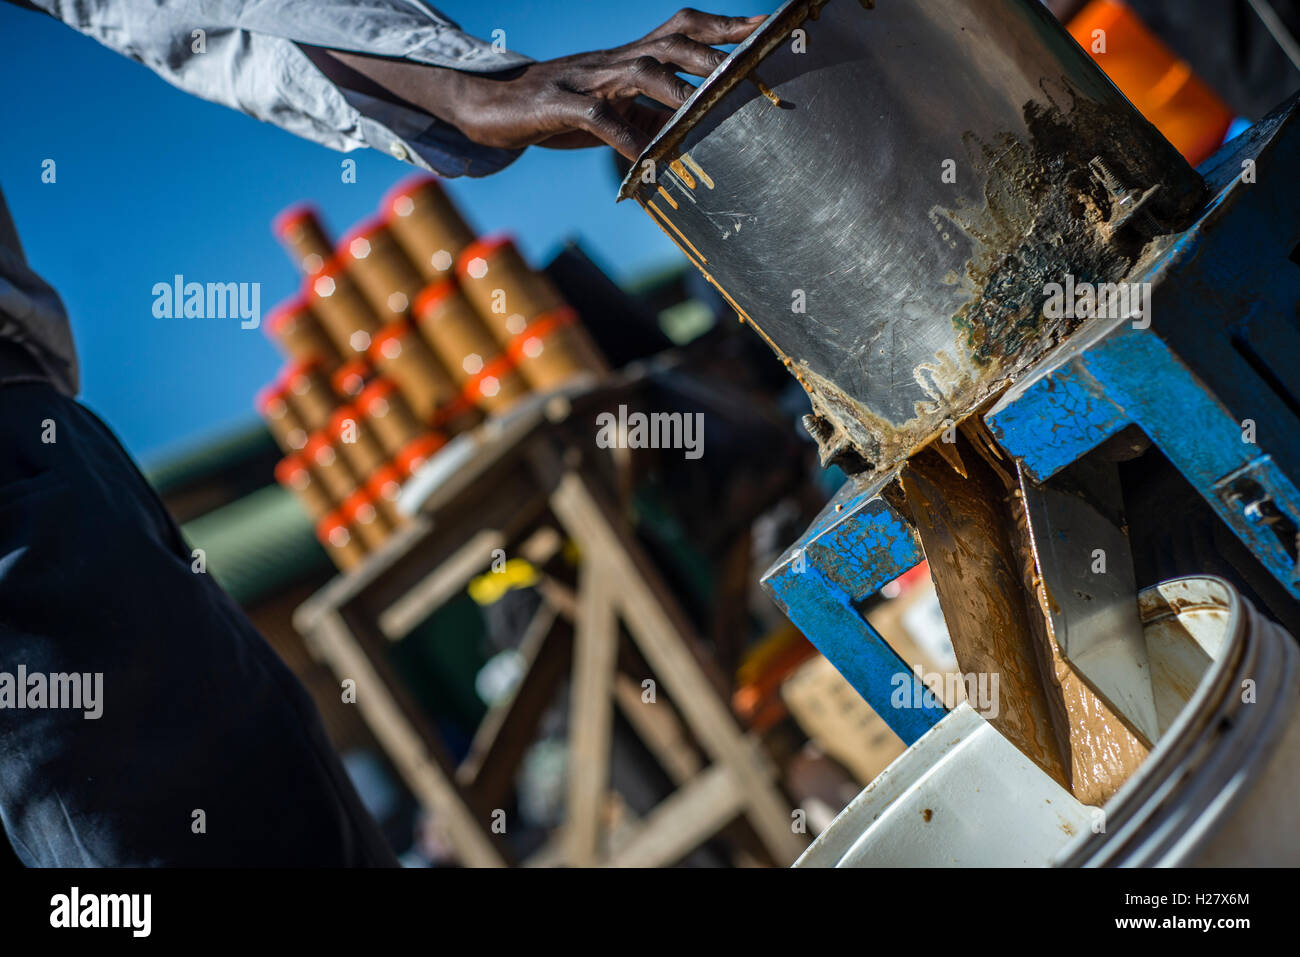 A man makes peanut butter for sell at the market in Lusaka, Zambia Stock Photo